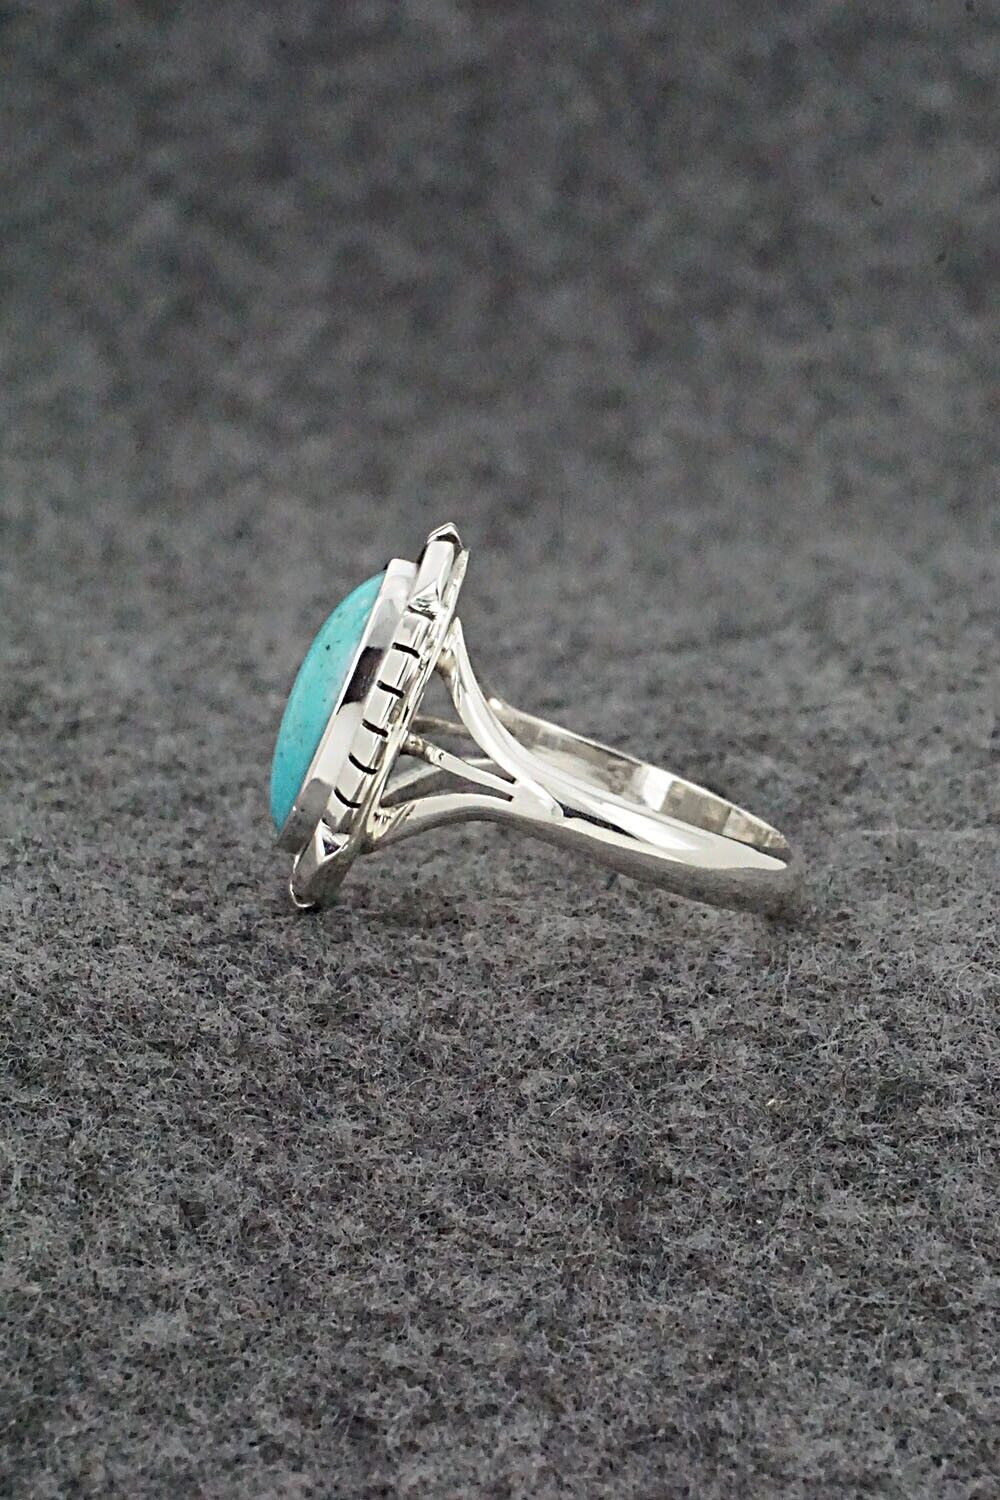 Turquoise & Sterling Silver Ring - Amos Begay - Size 8.25